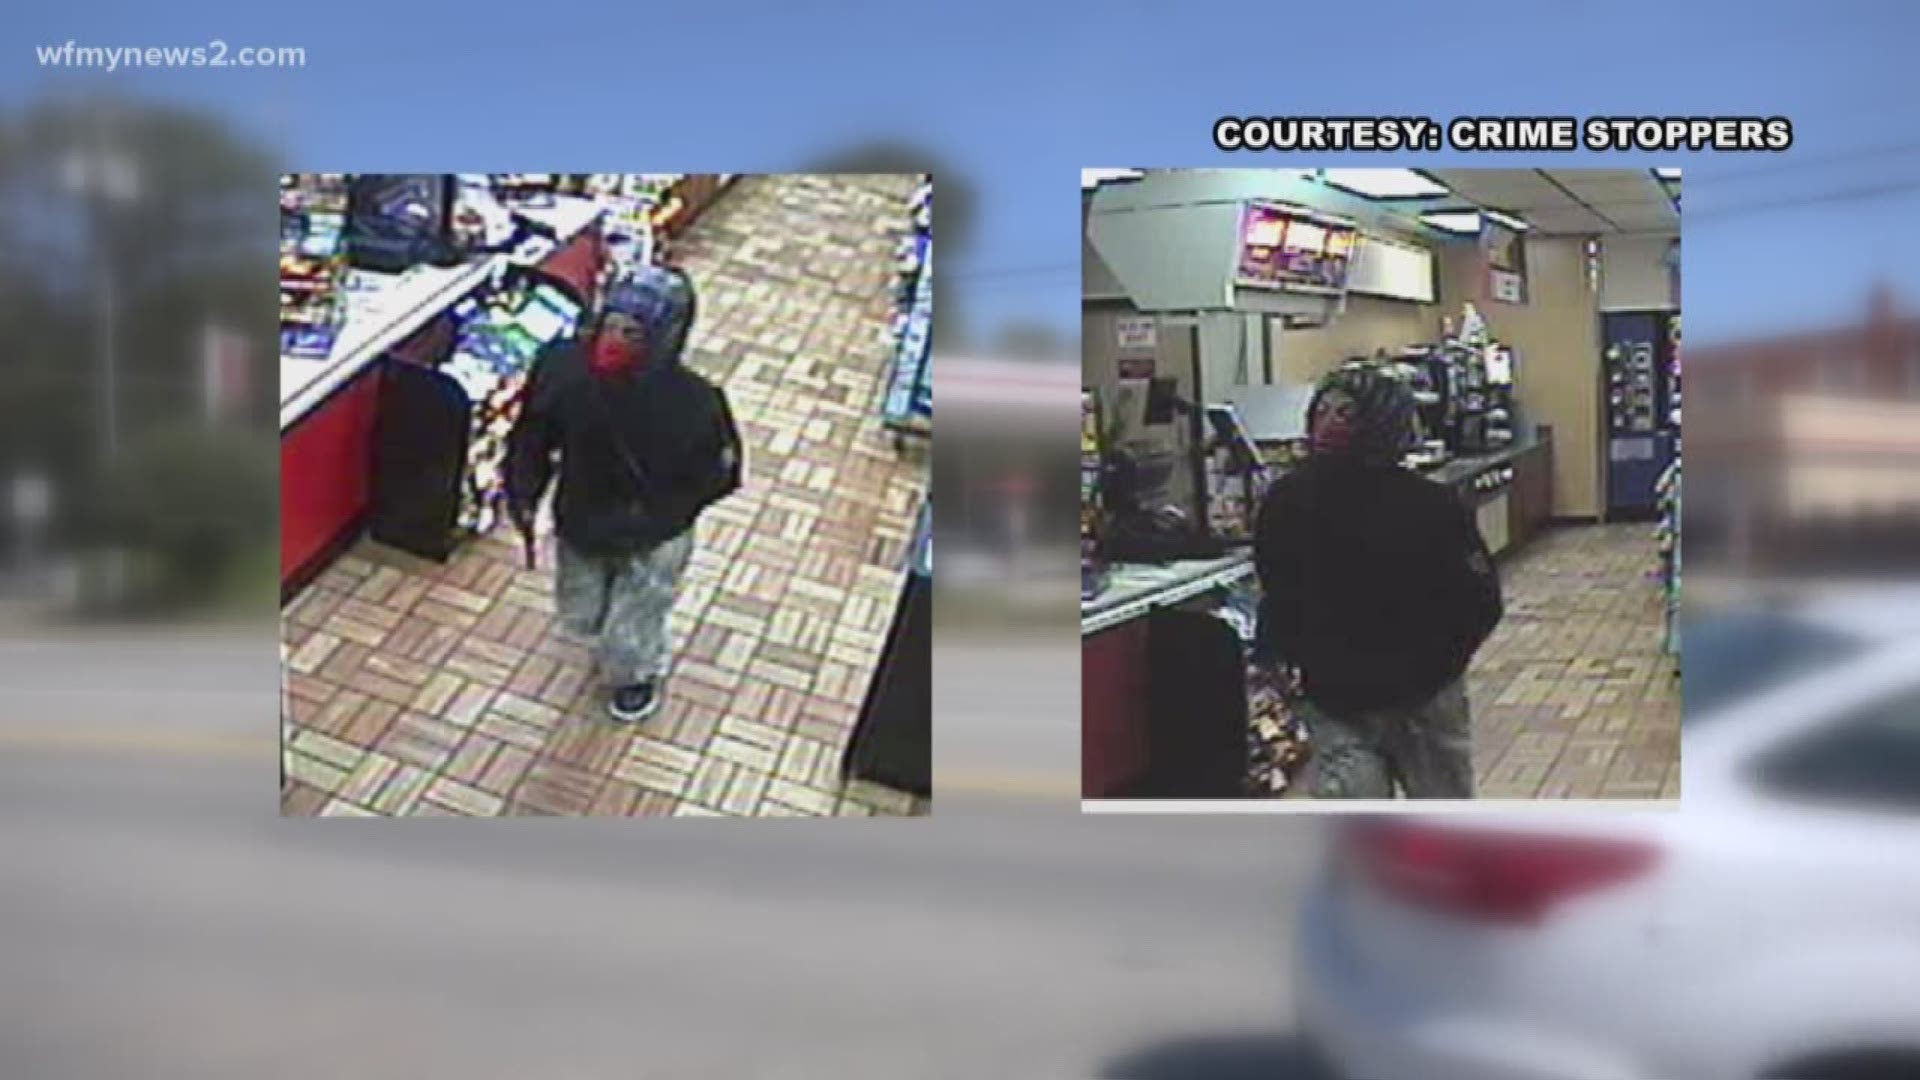 Greensboro police say they’re looking for two men in connection to a string of violent armed robberies targeting gas stations.